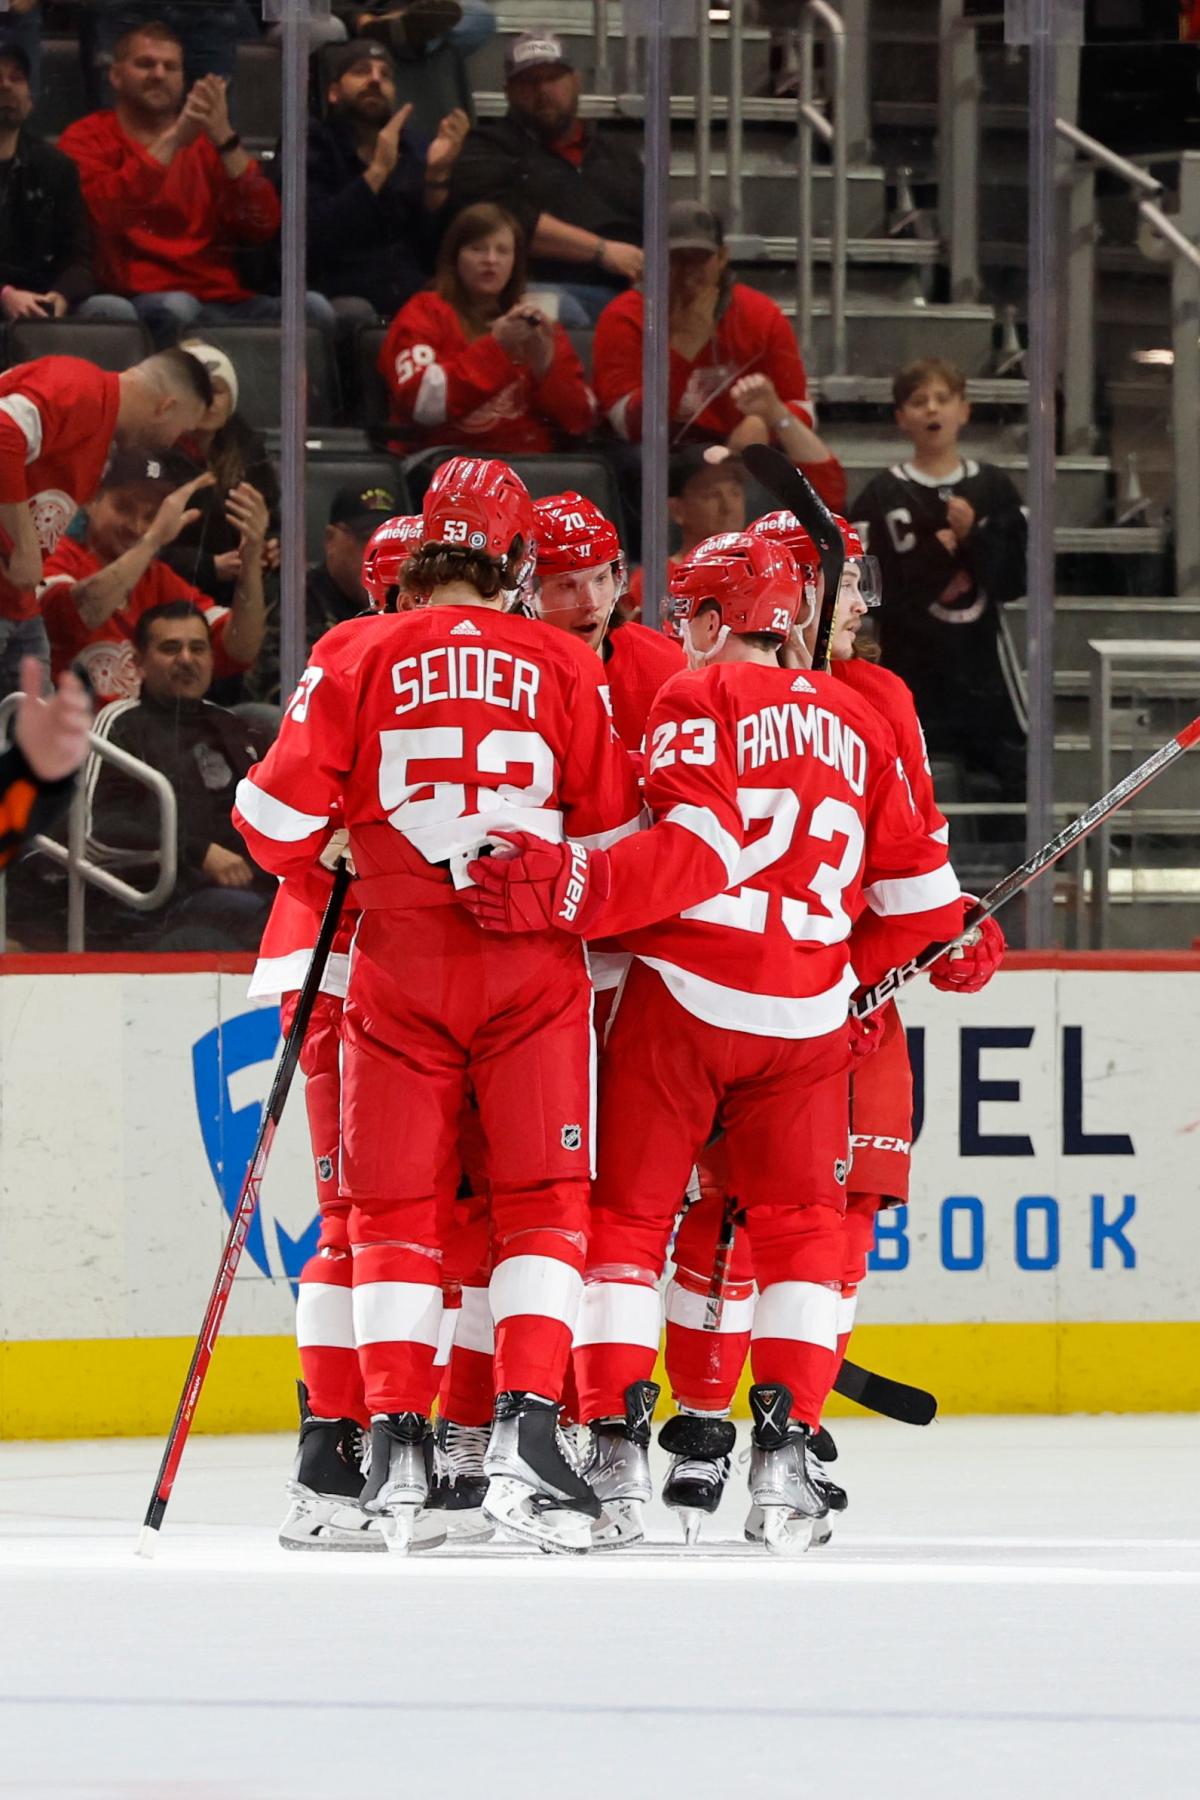 Detroit Red Wings' goal in last home game Give fans 'something to cheer'